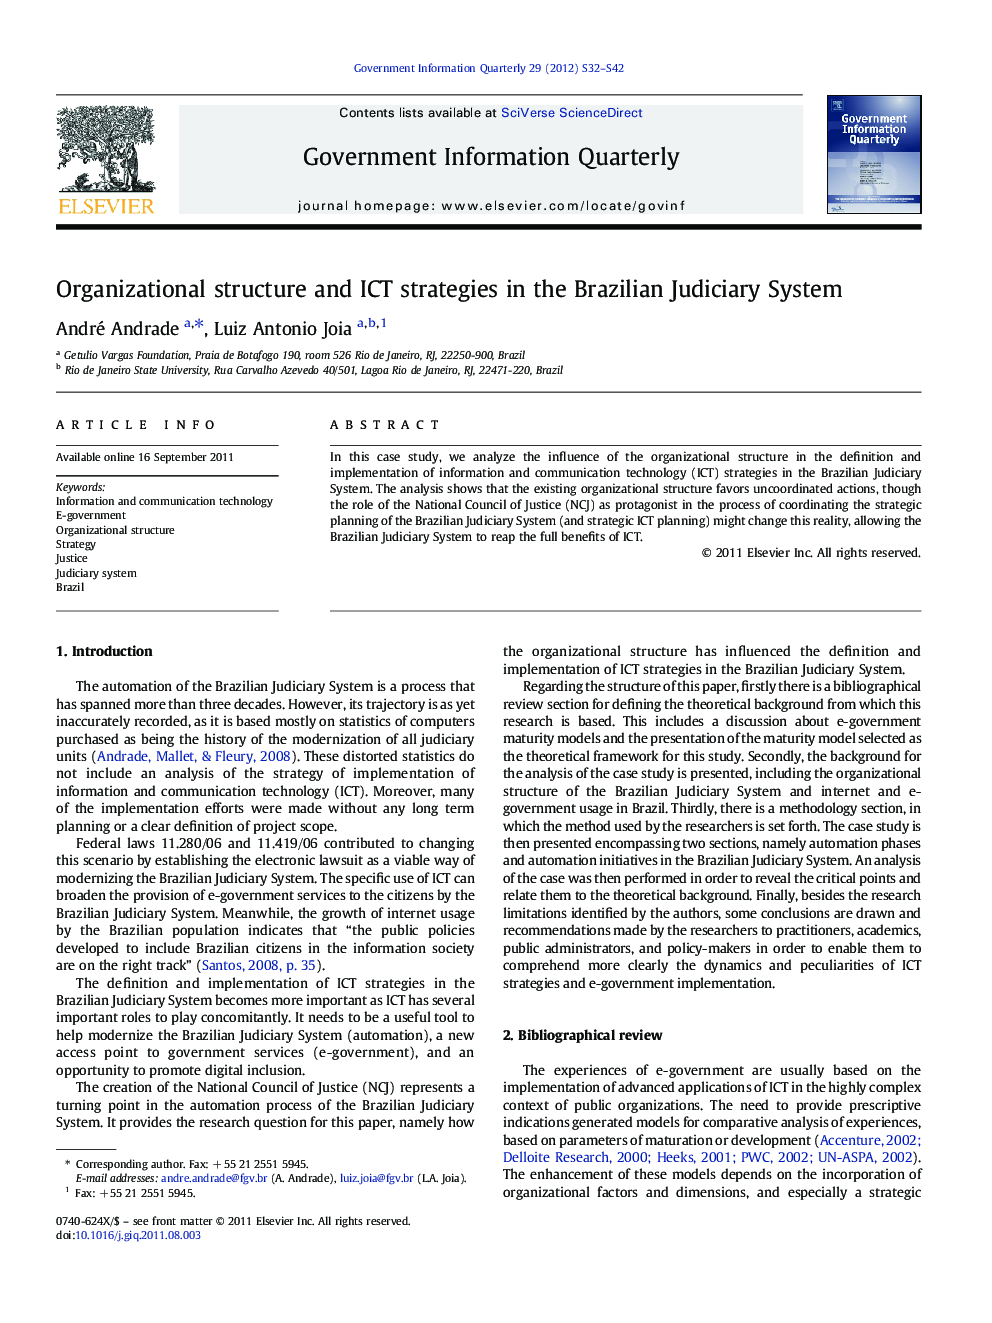 Organizational structure and ICT strategies in the Brazilian Judiciary System